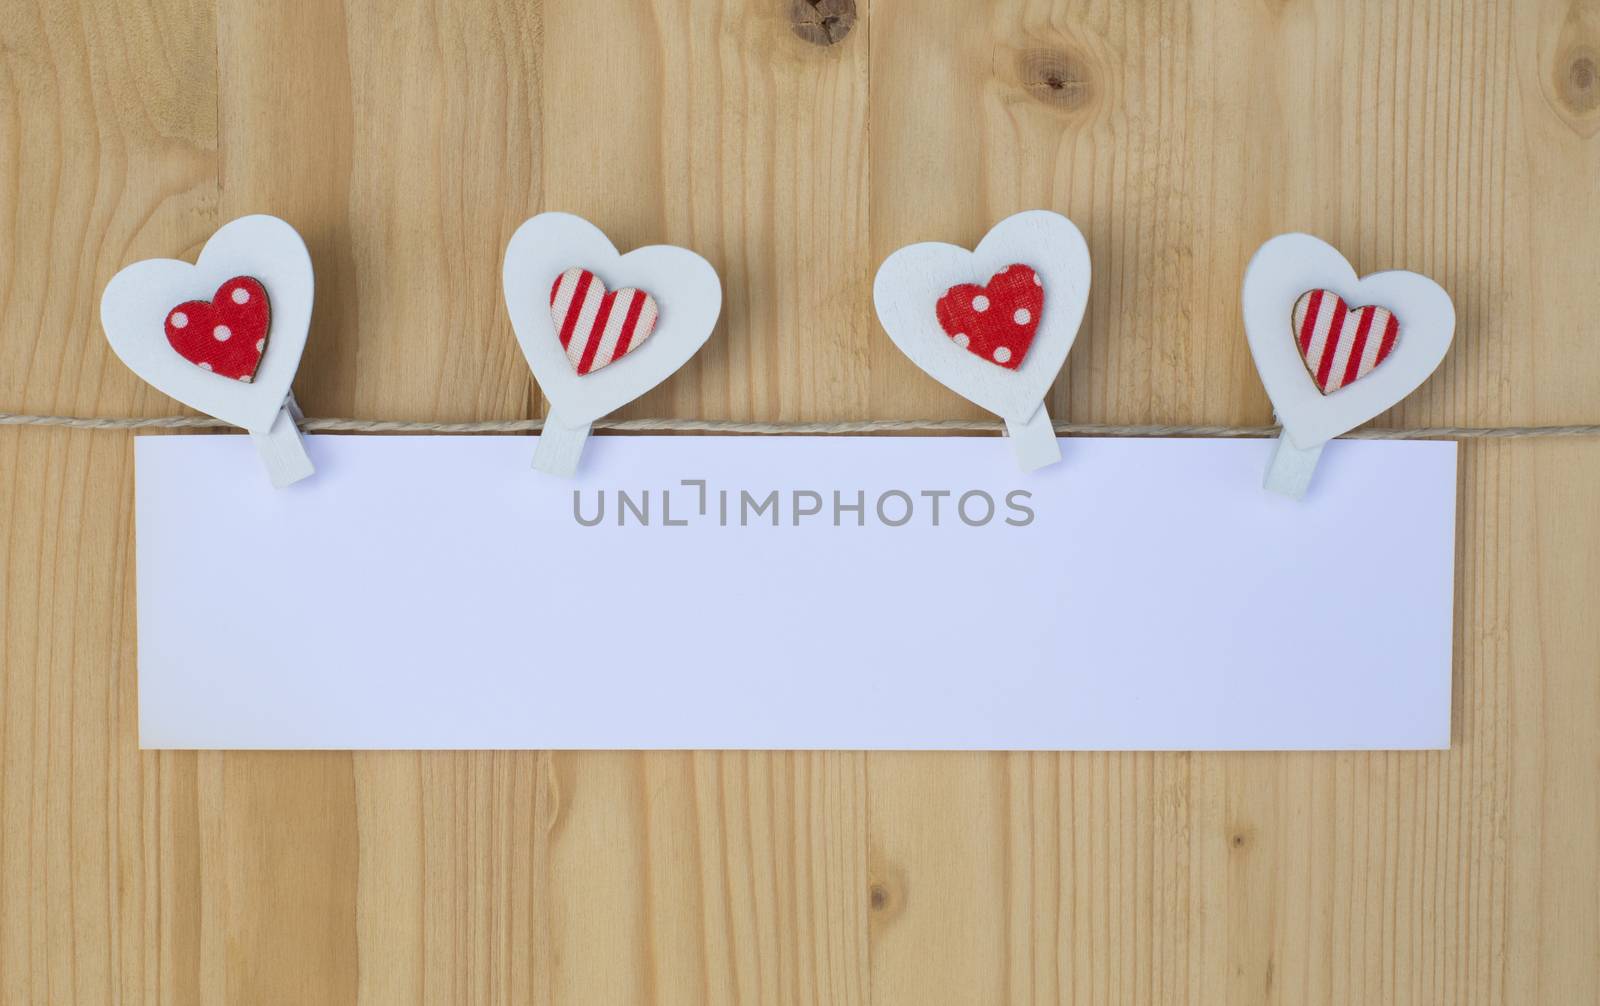 Four hearts with clothes pegs and paper on a cord on wood